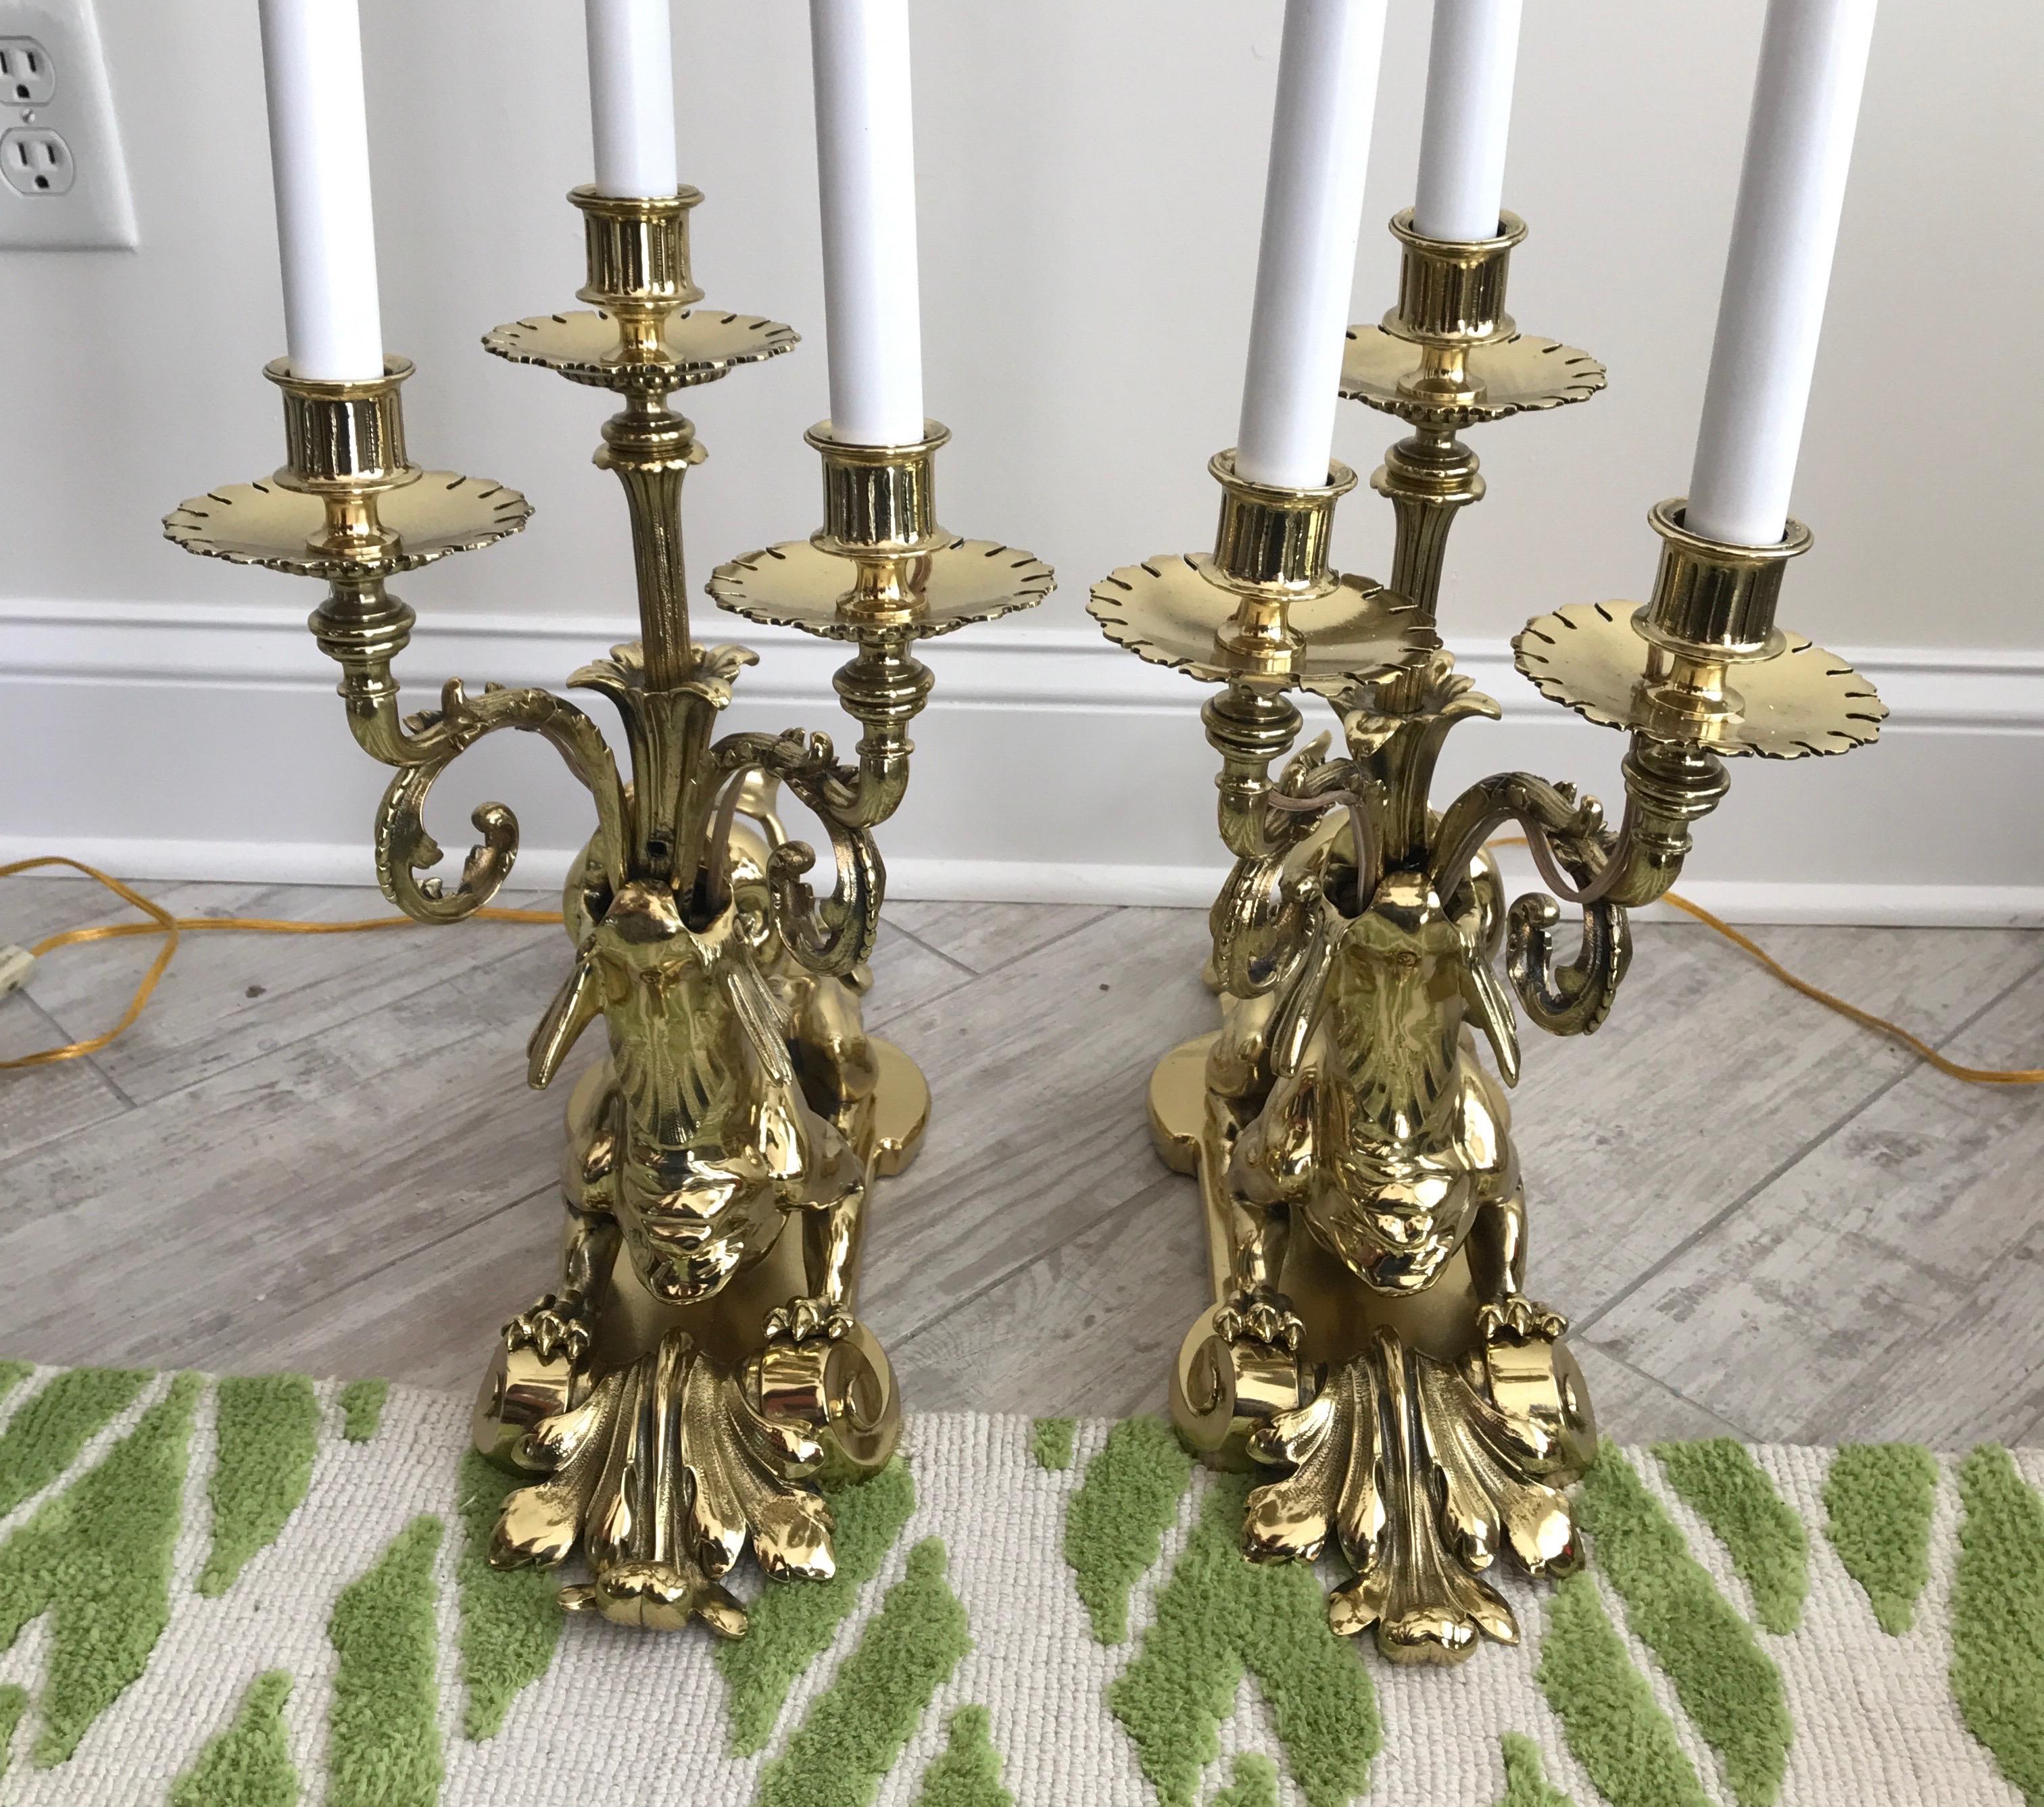 Pair of Early 20th Century Solid Brass Sea Urchin Candelabra For Sale 8